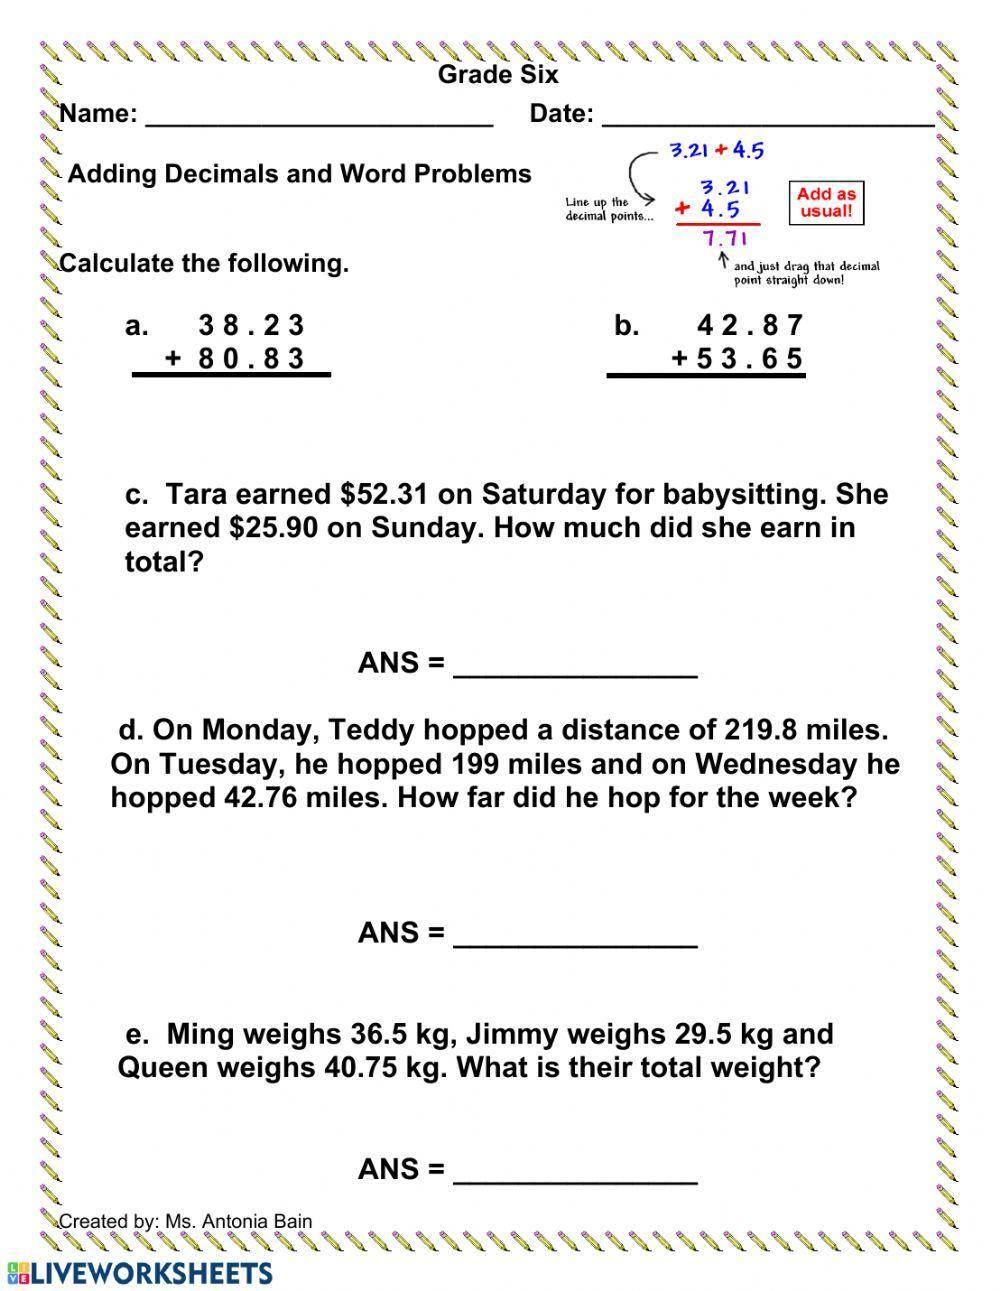 Adding Decimals with Word Problems